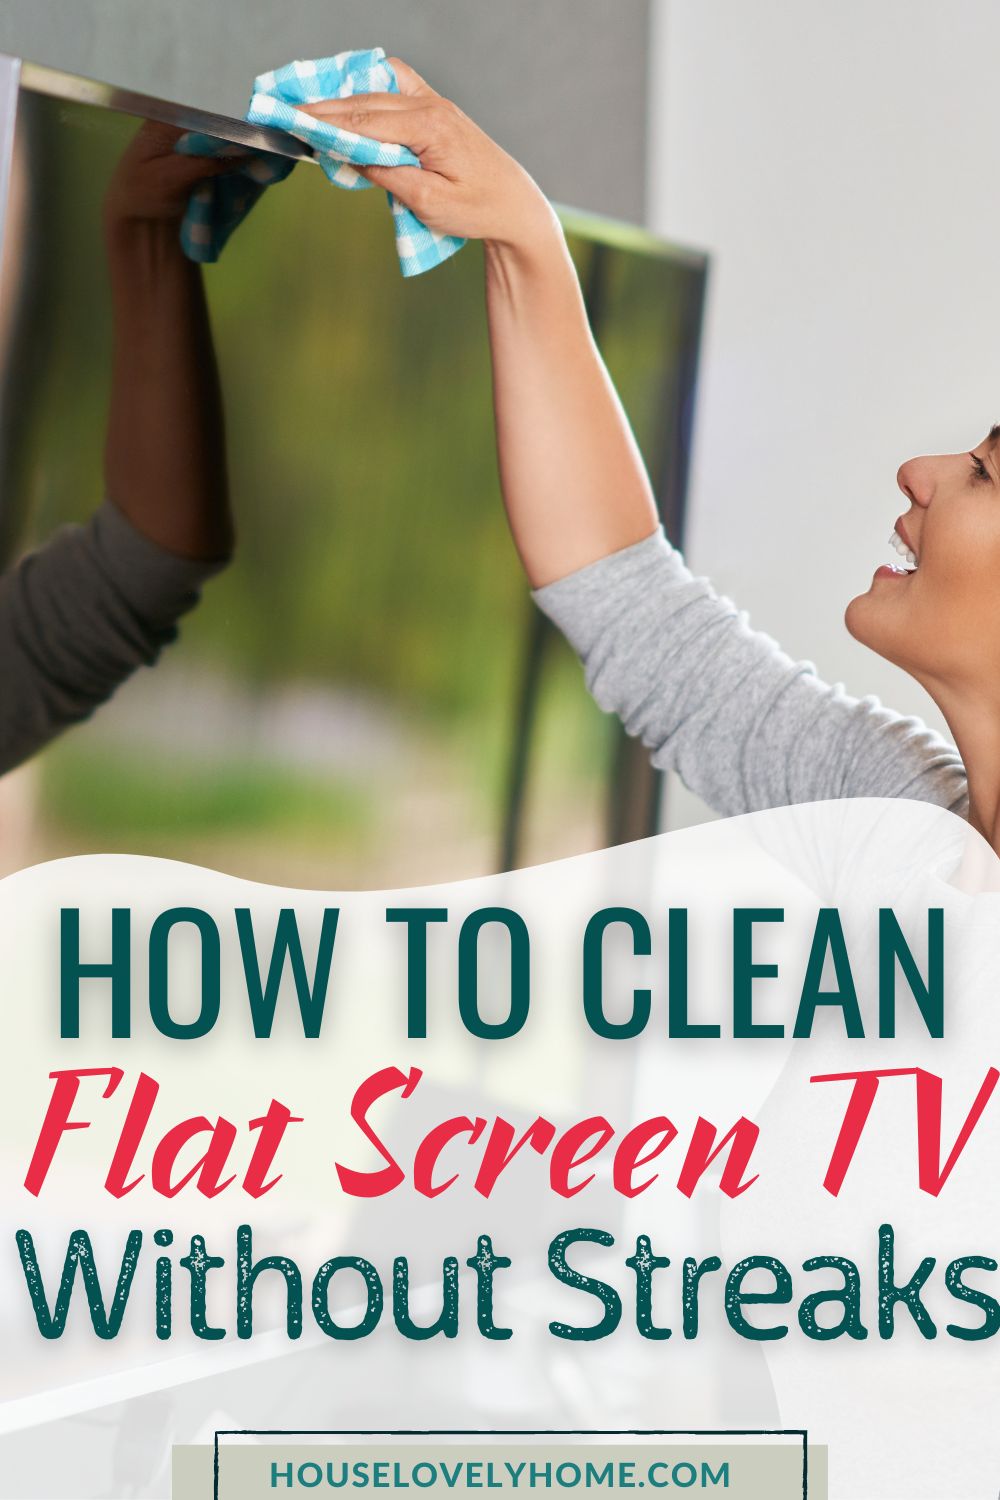 A woman cleaning a flat screen tv hanging on a wall with text overlays that read How to Clean Flat Screen TV Without Streaks